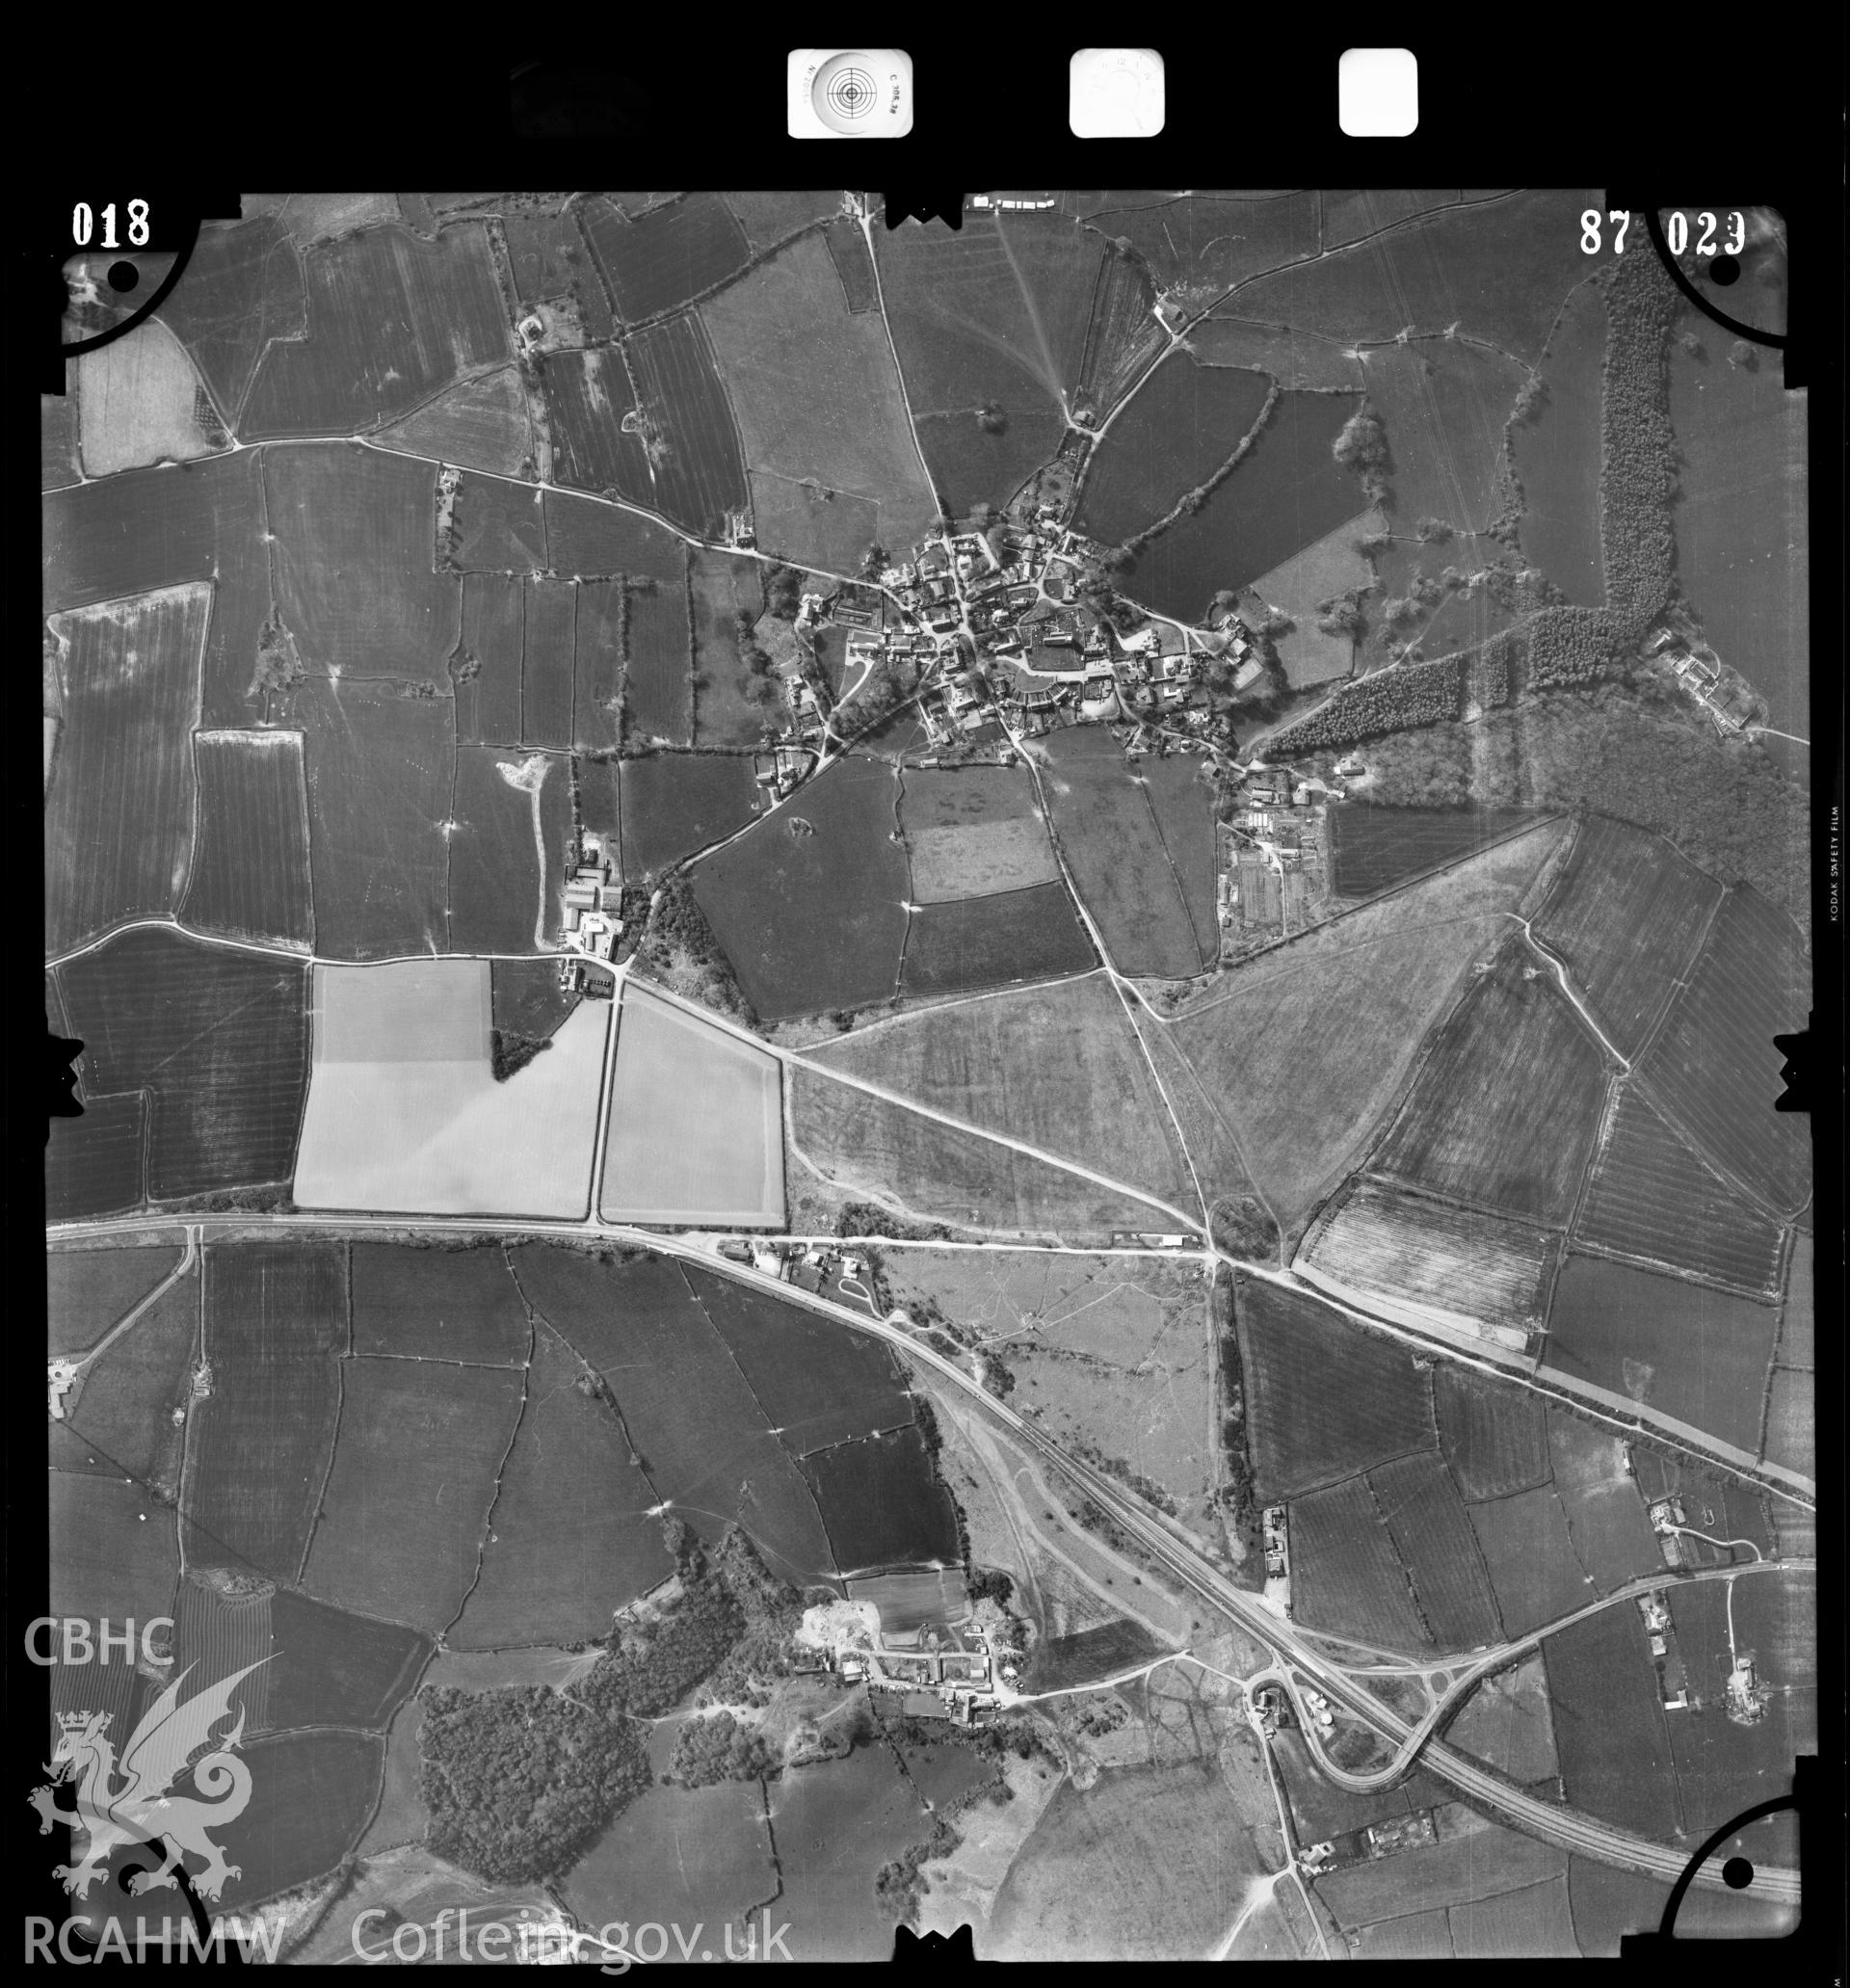 Digitised copy of an aerial photograph showing the St Athan area, taken by Ordnance Survey, 1987.